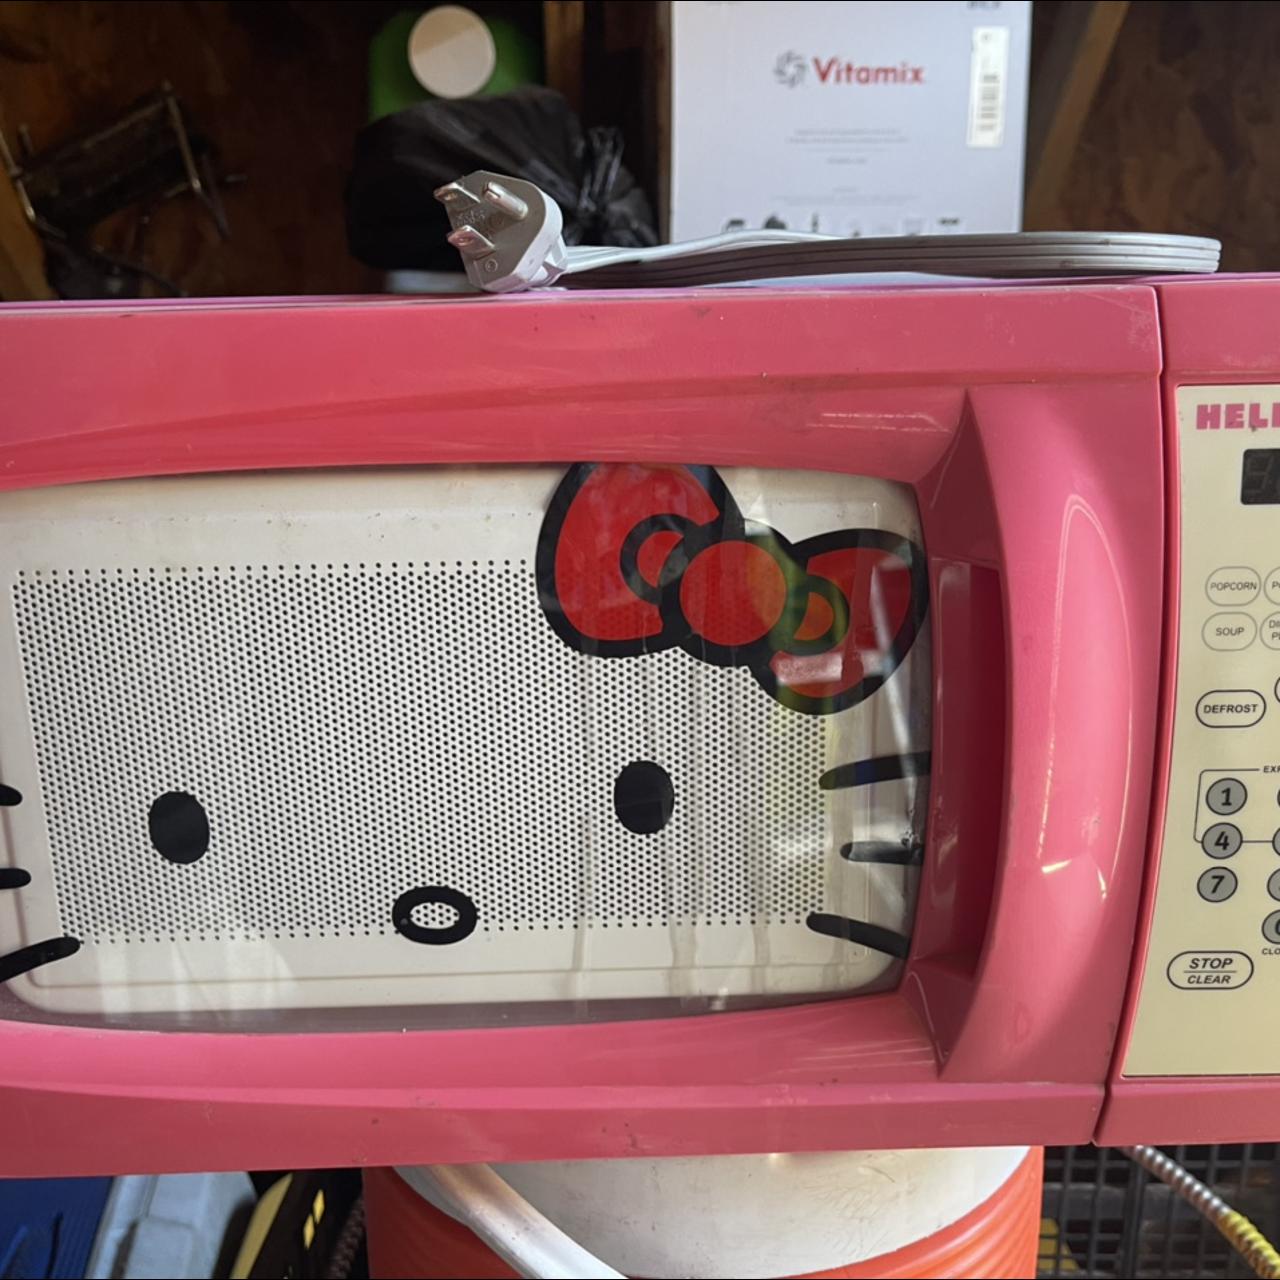 Hello Kitty Hot Pink Microwave Collectible Working Good Condition Tested  scratch